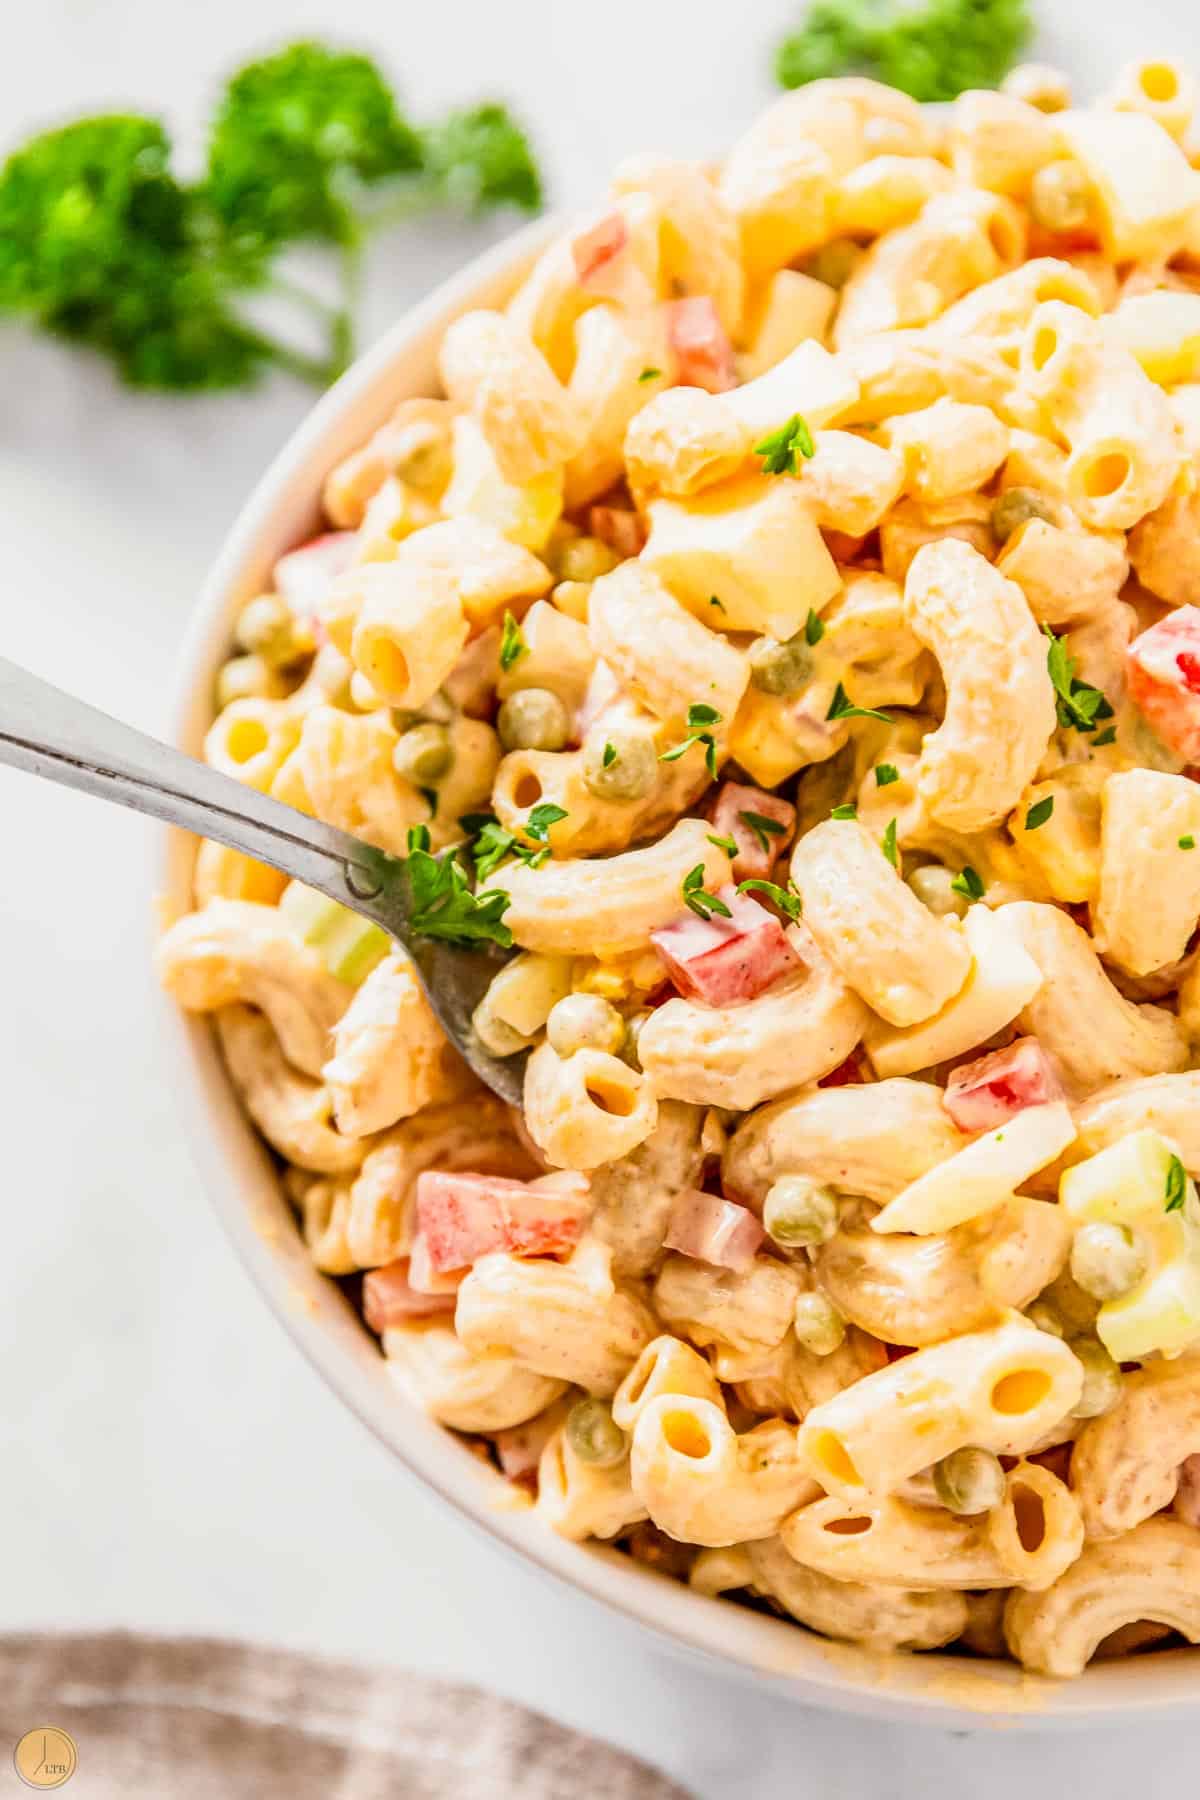 spoon of pasta salad with parsley on it